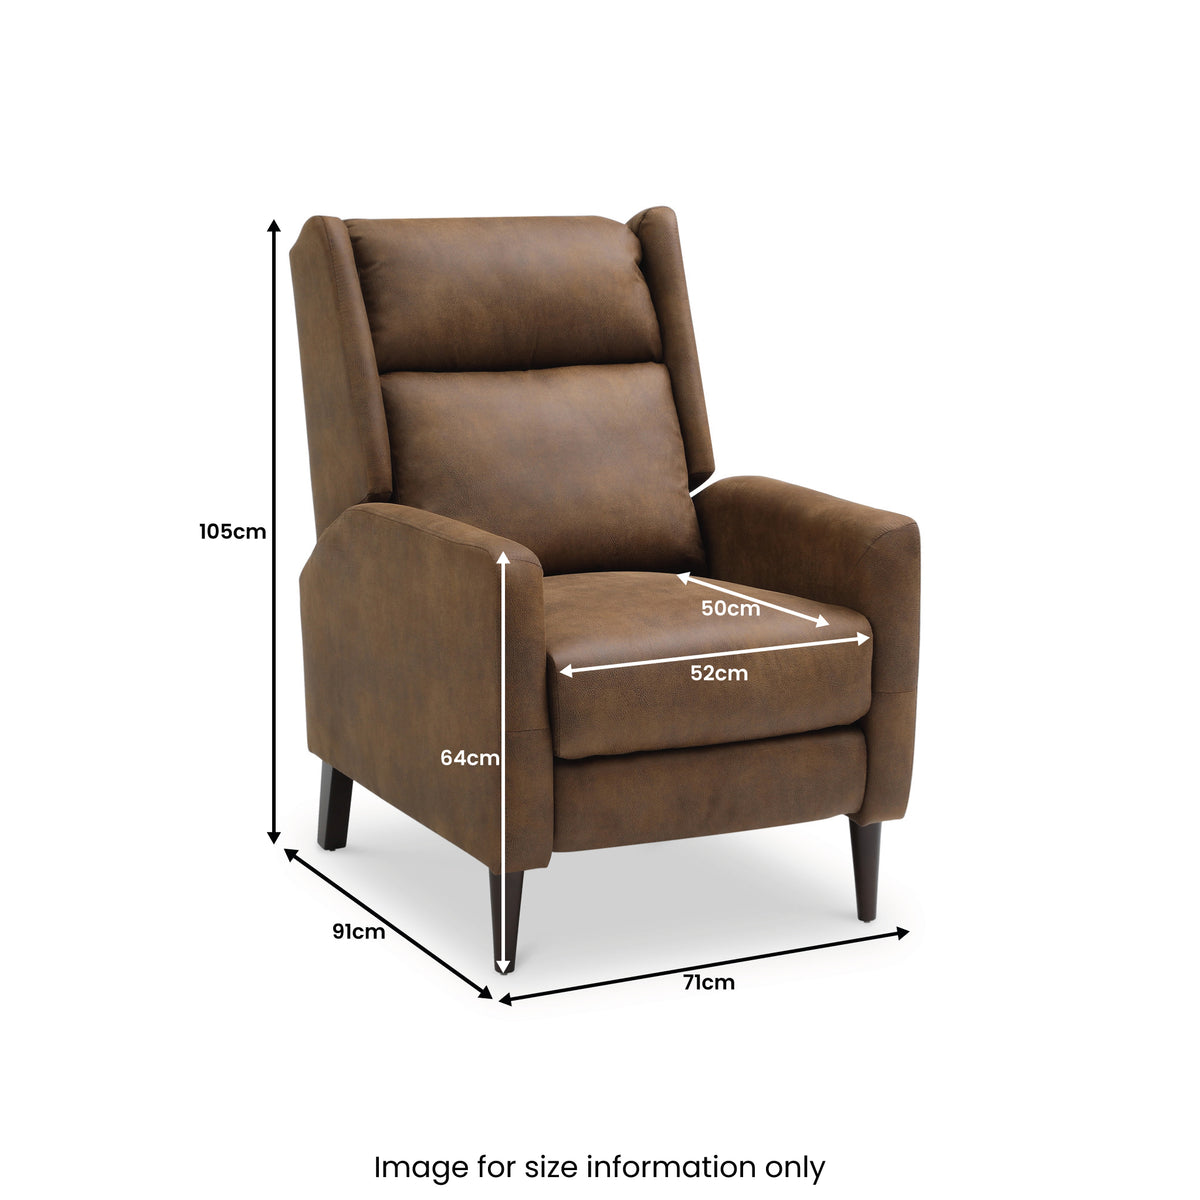 Moreton Brown Faux Leather Reclining Armchair dimensions